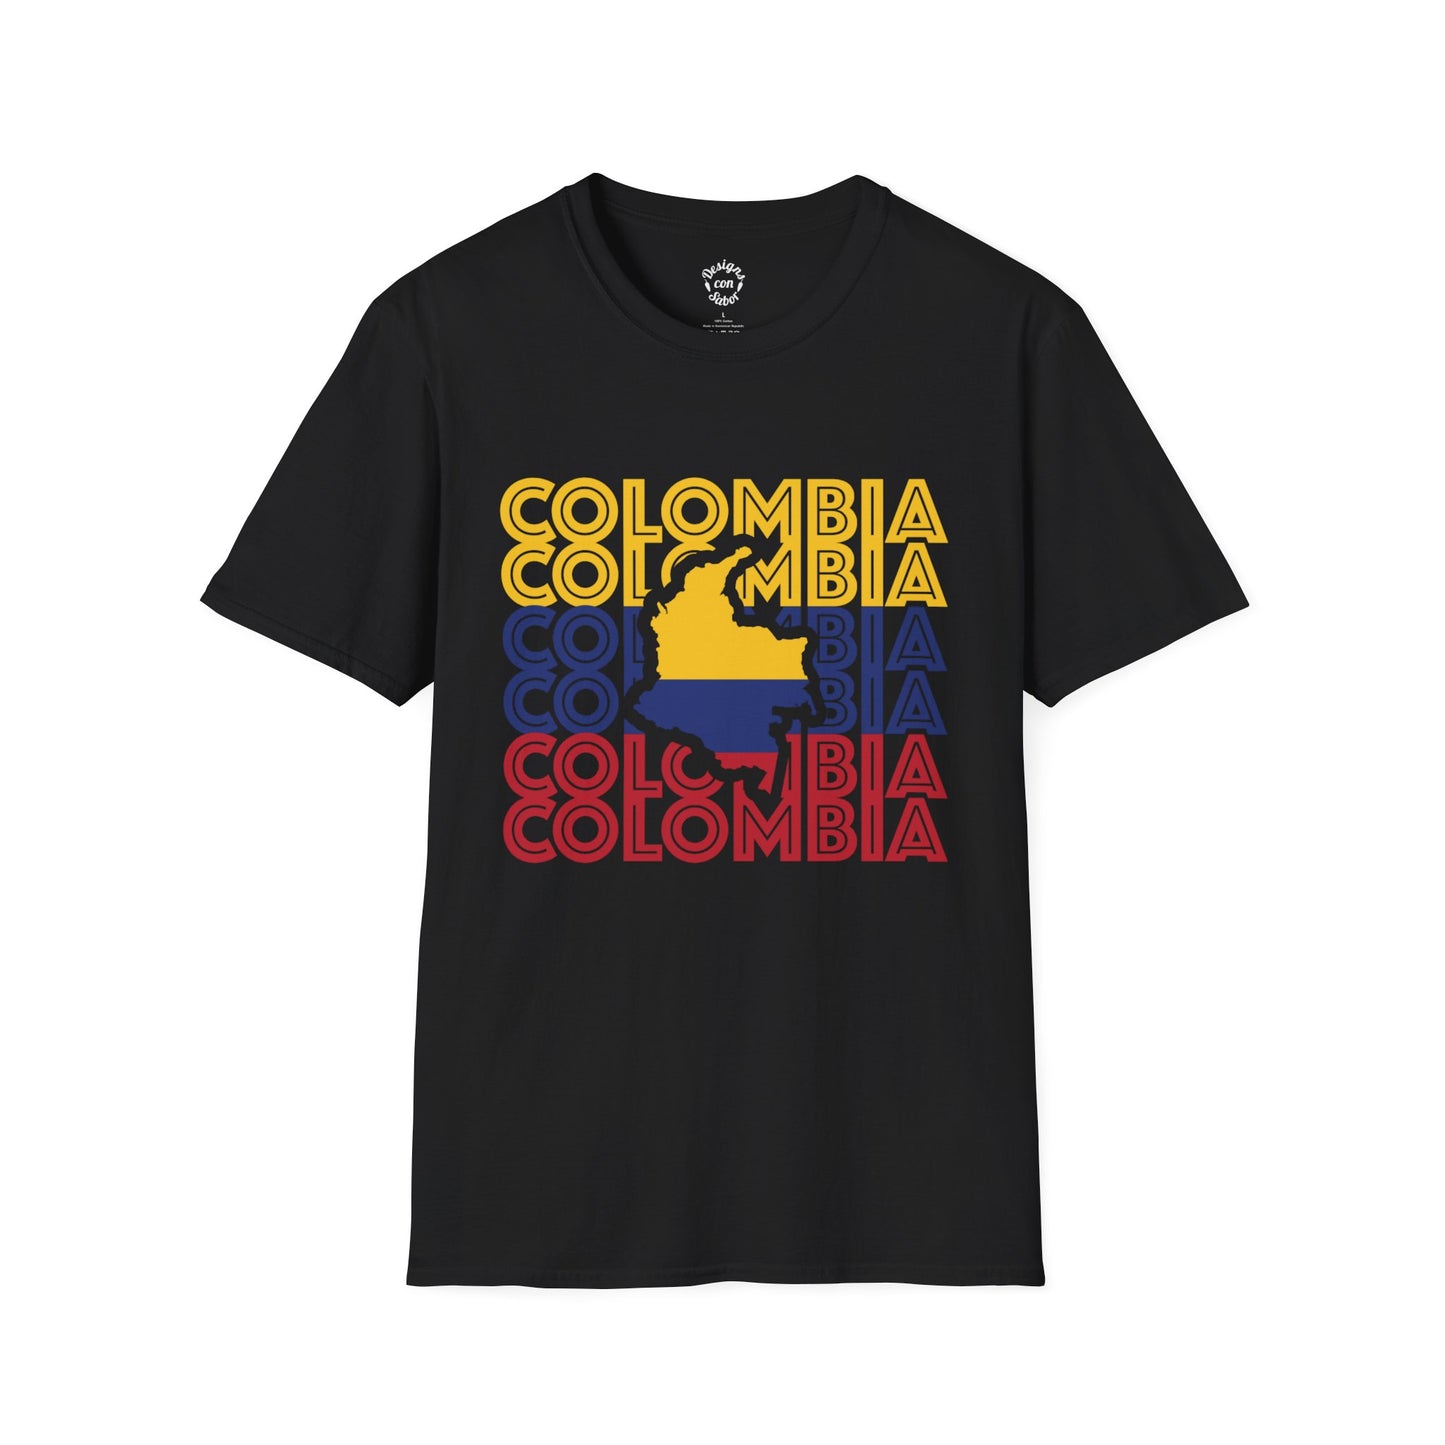 Colombia With Country Outline